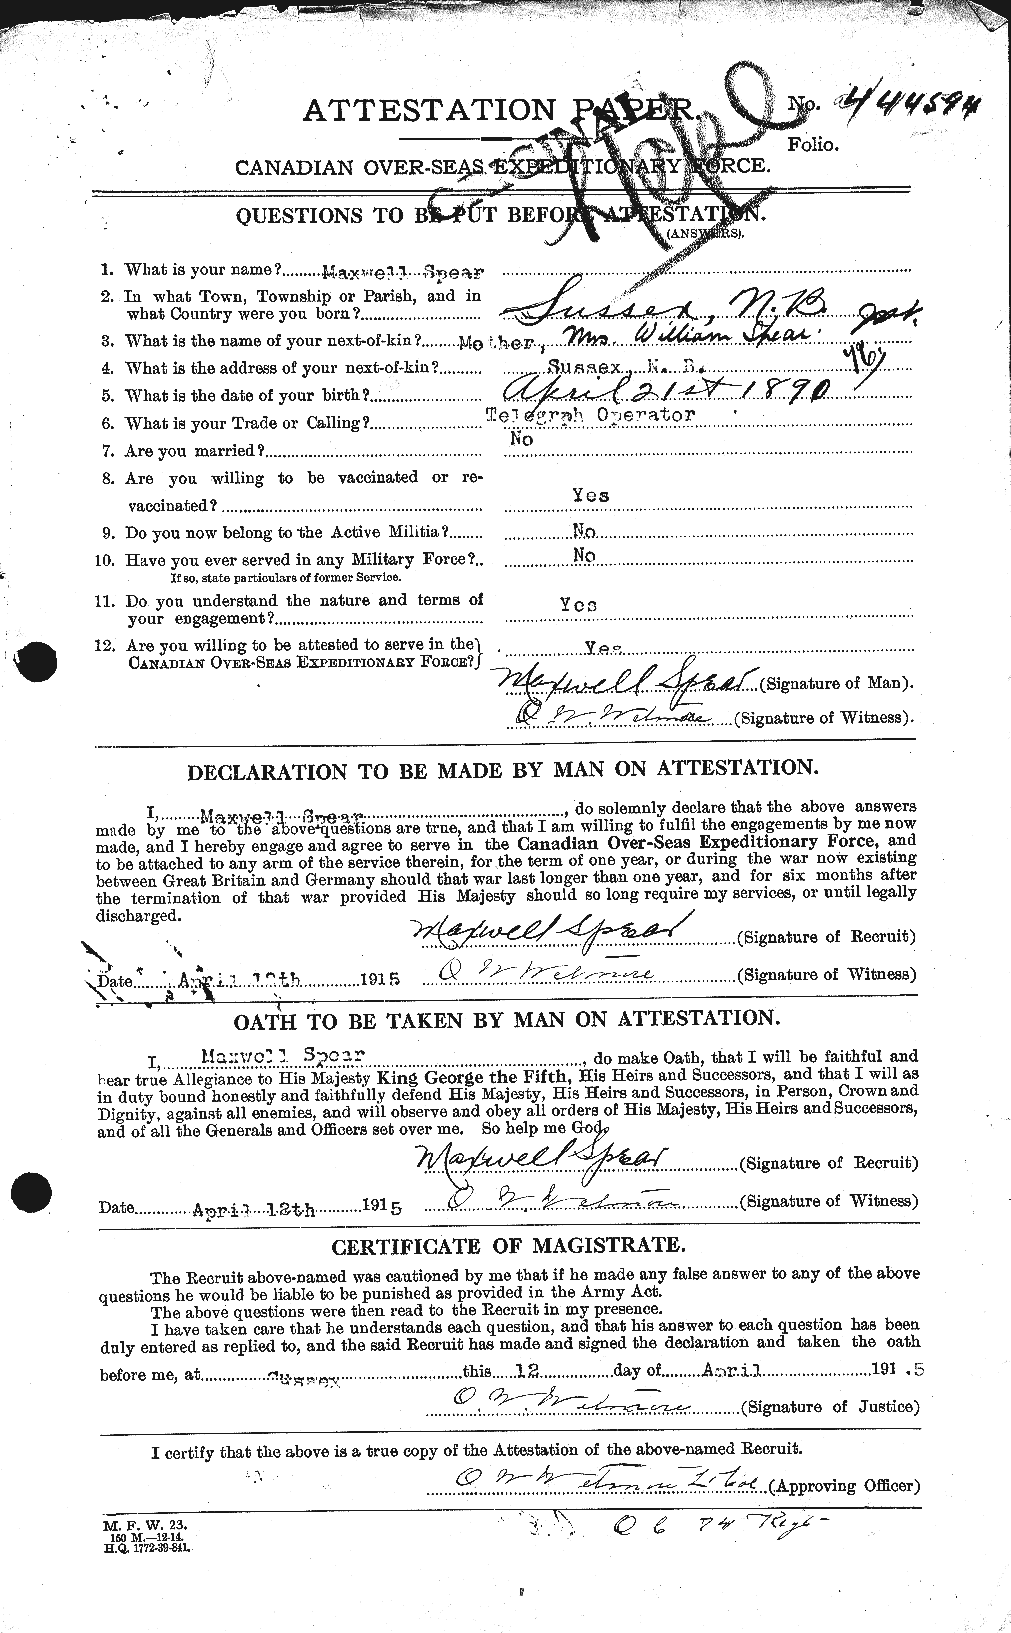 Personnel Records of the First World War - CEF 110830a